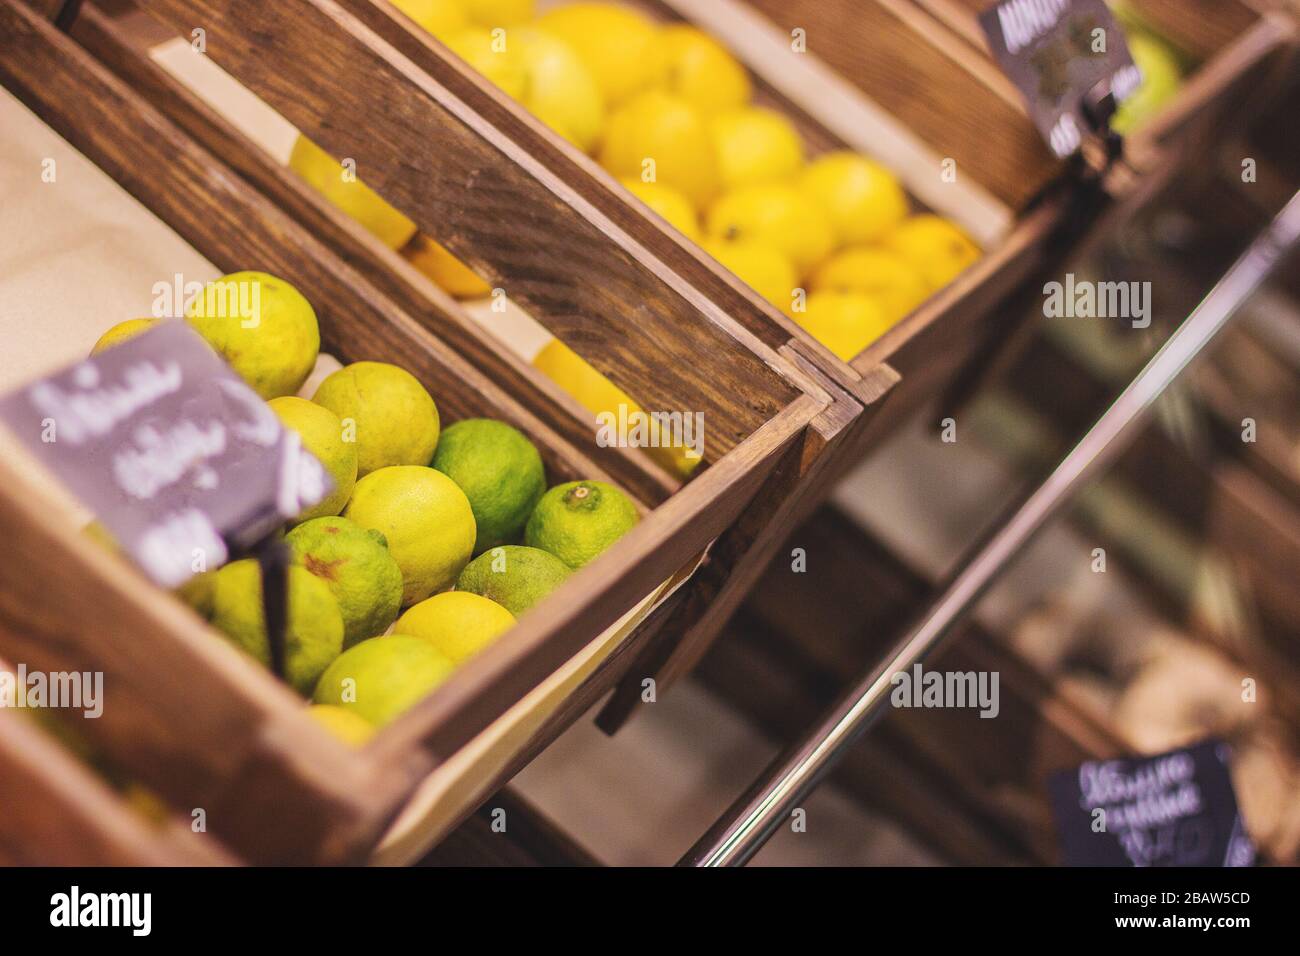 Closeup of boxes with different fruits at grocery store. Limes, oranges and lemons in wooden boxes at fruit stall at market. Dieting, healthy lifestyl Stock Photo